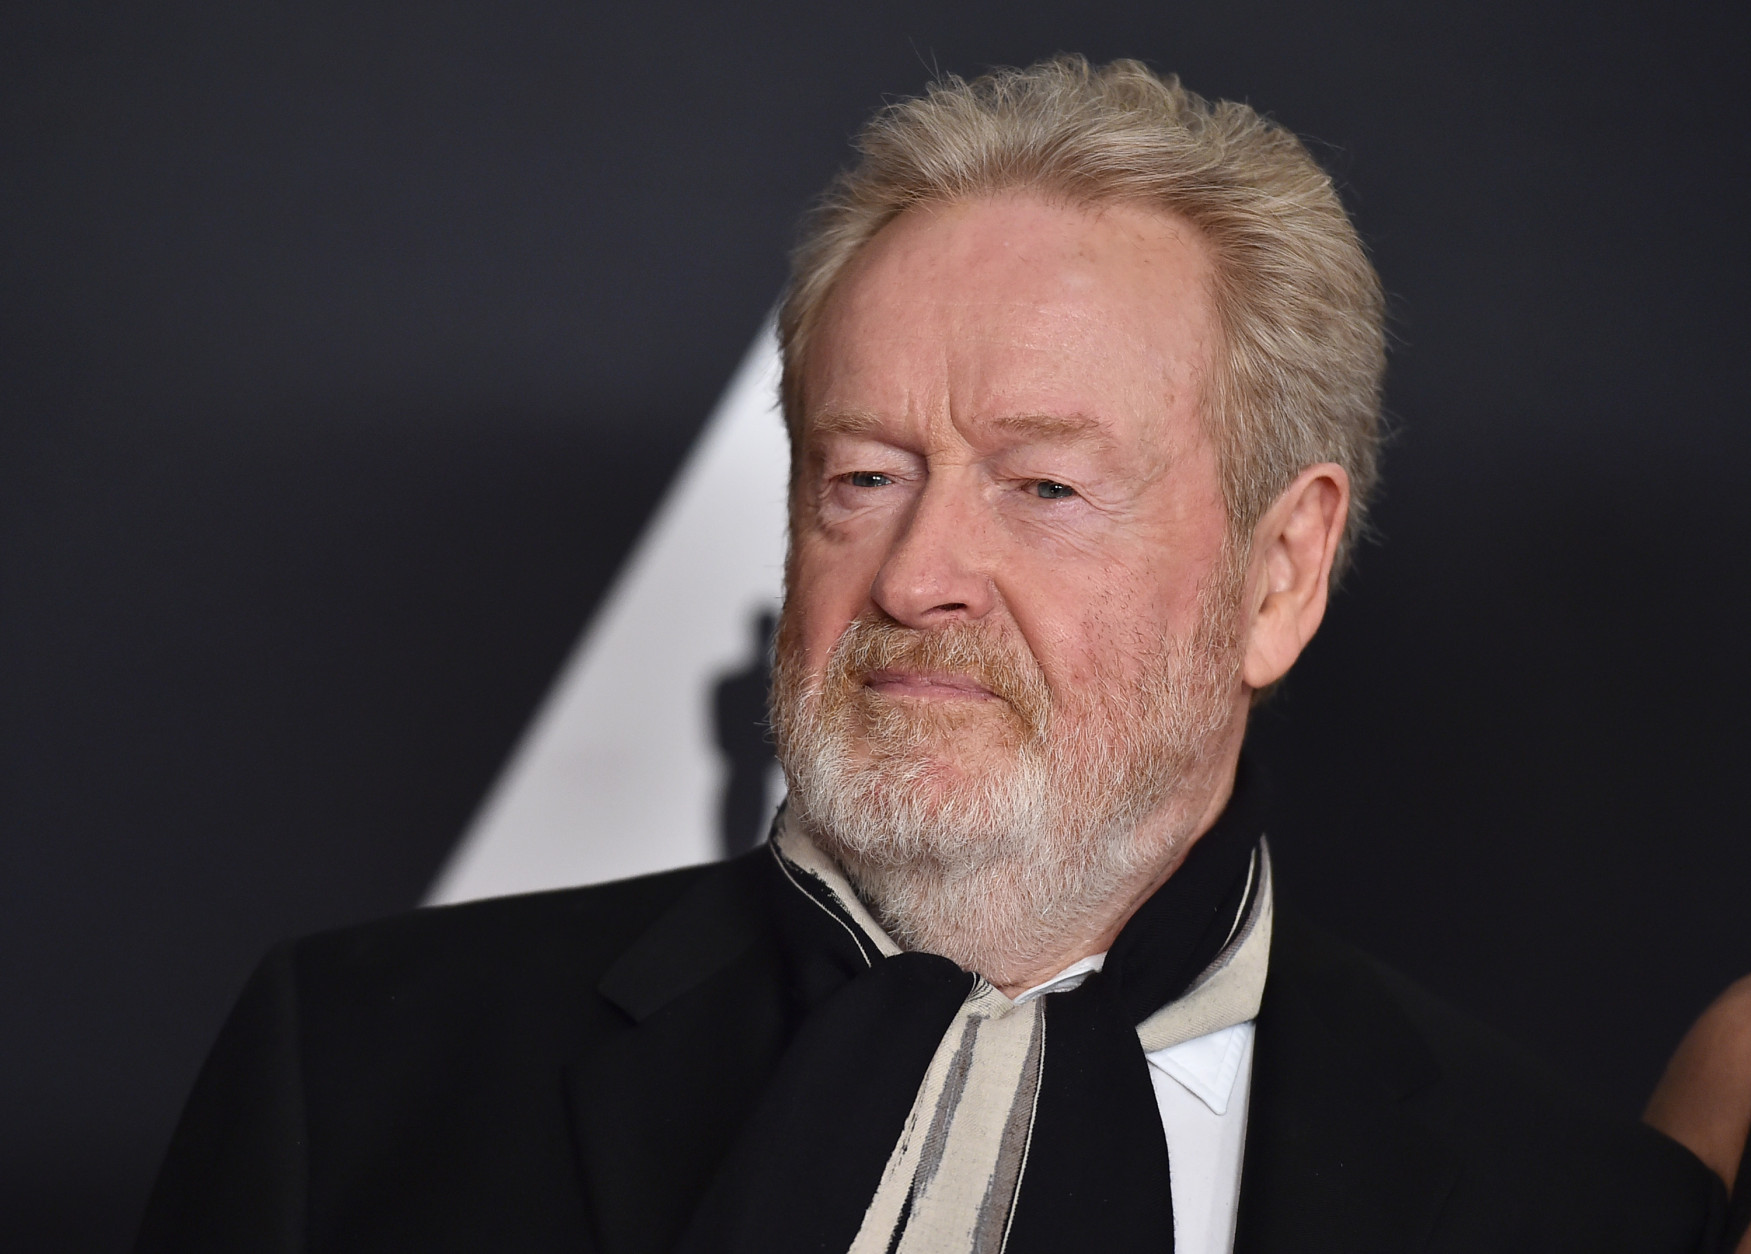 Ridley Scott arrives at the Governors Awards at the Dolby Ballroom on Saturday, Nov. 14, 2015, in Los Angeles. (Photo by Jordan Strauss/Invision/AP)